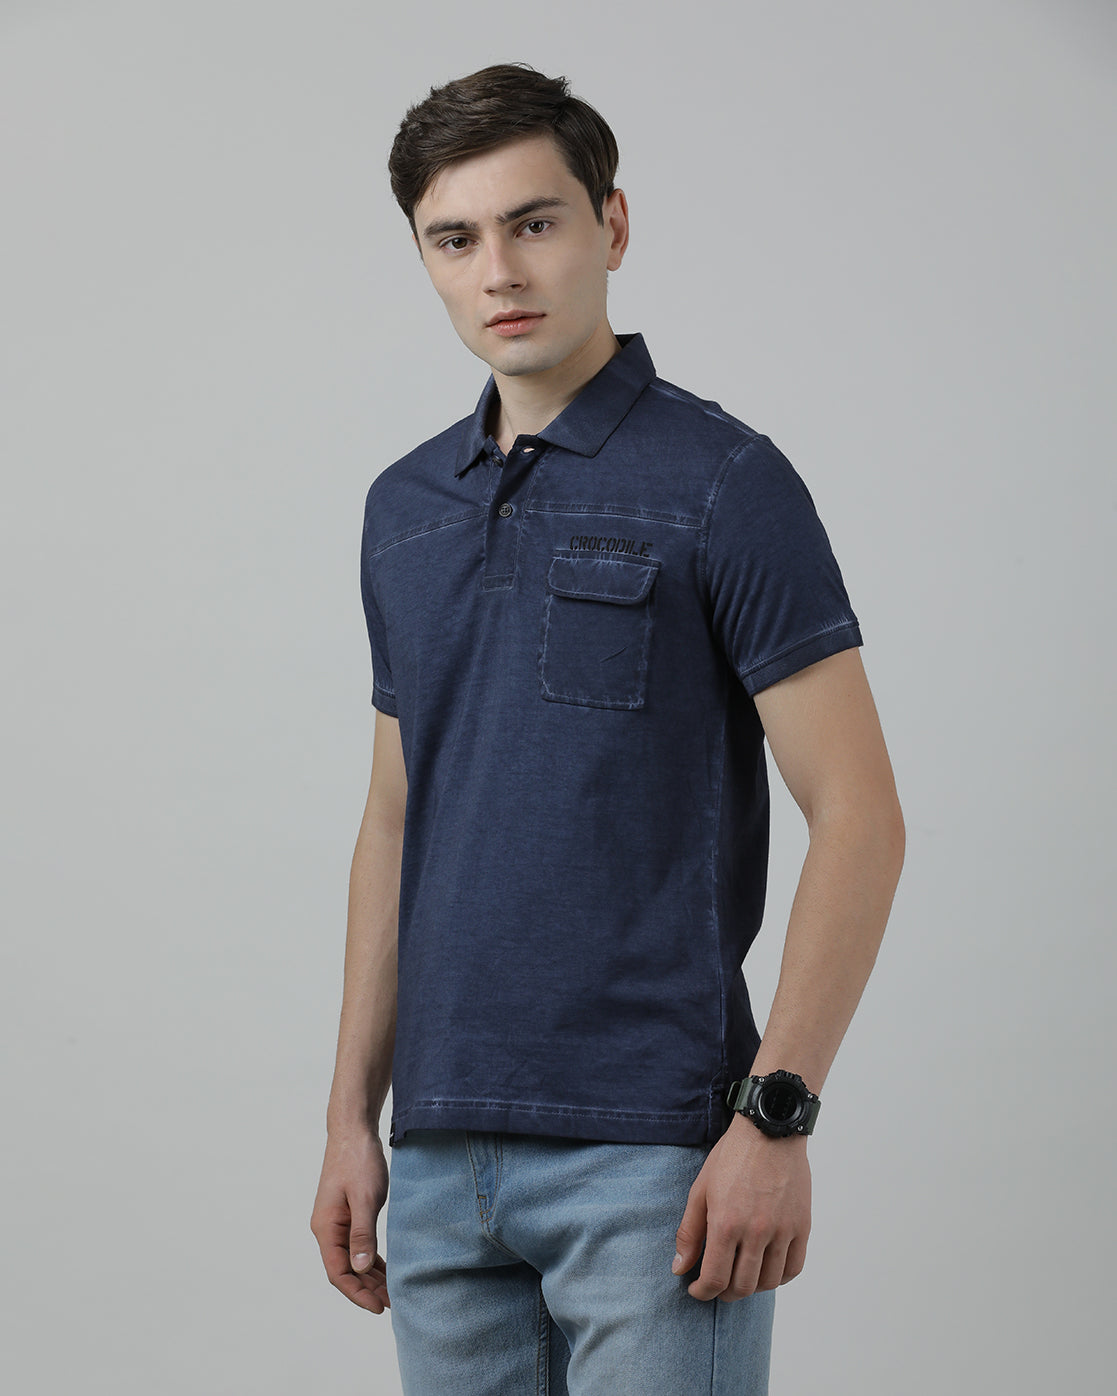 Casual Blue T-Shirt Half Sleeve Slim Fit with Collar for Men